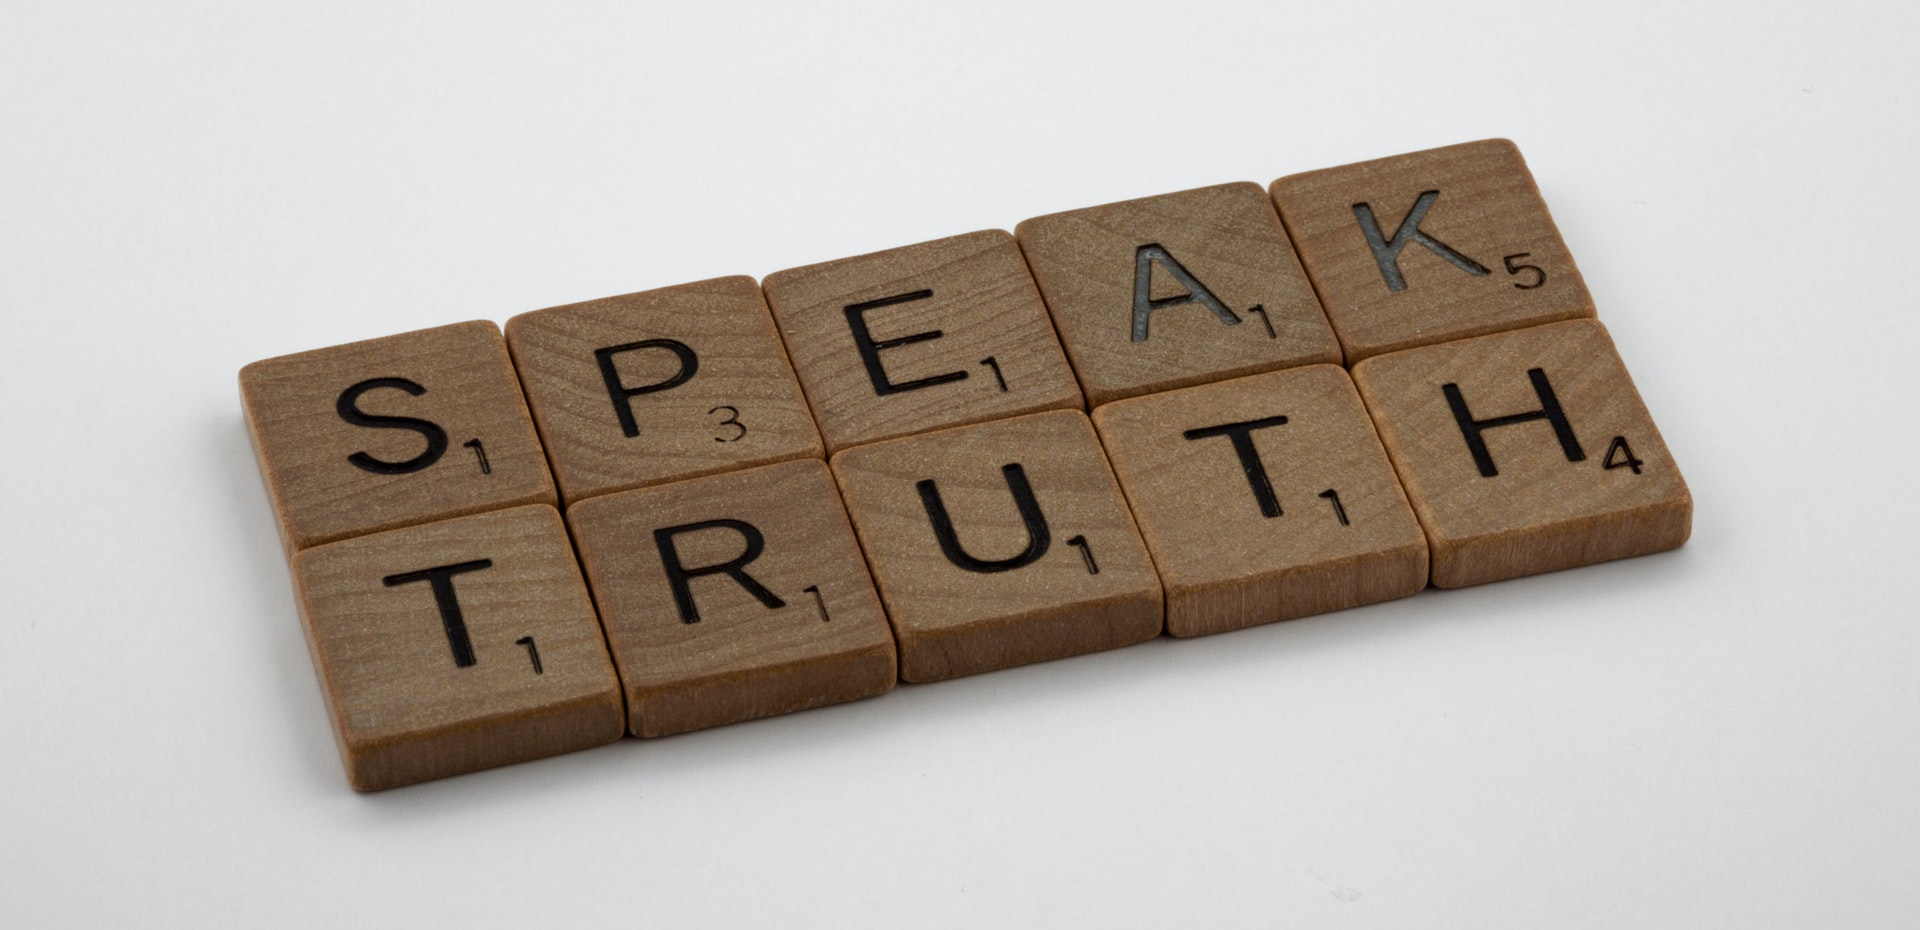 Speak Truth spelled out with Scrabble tiles